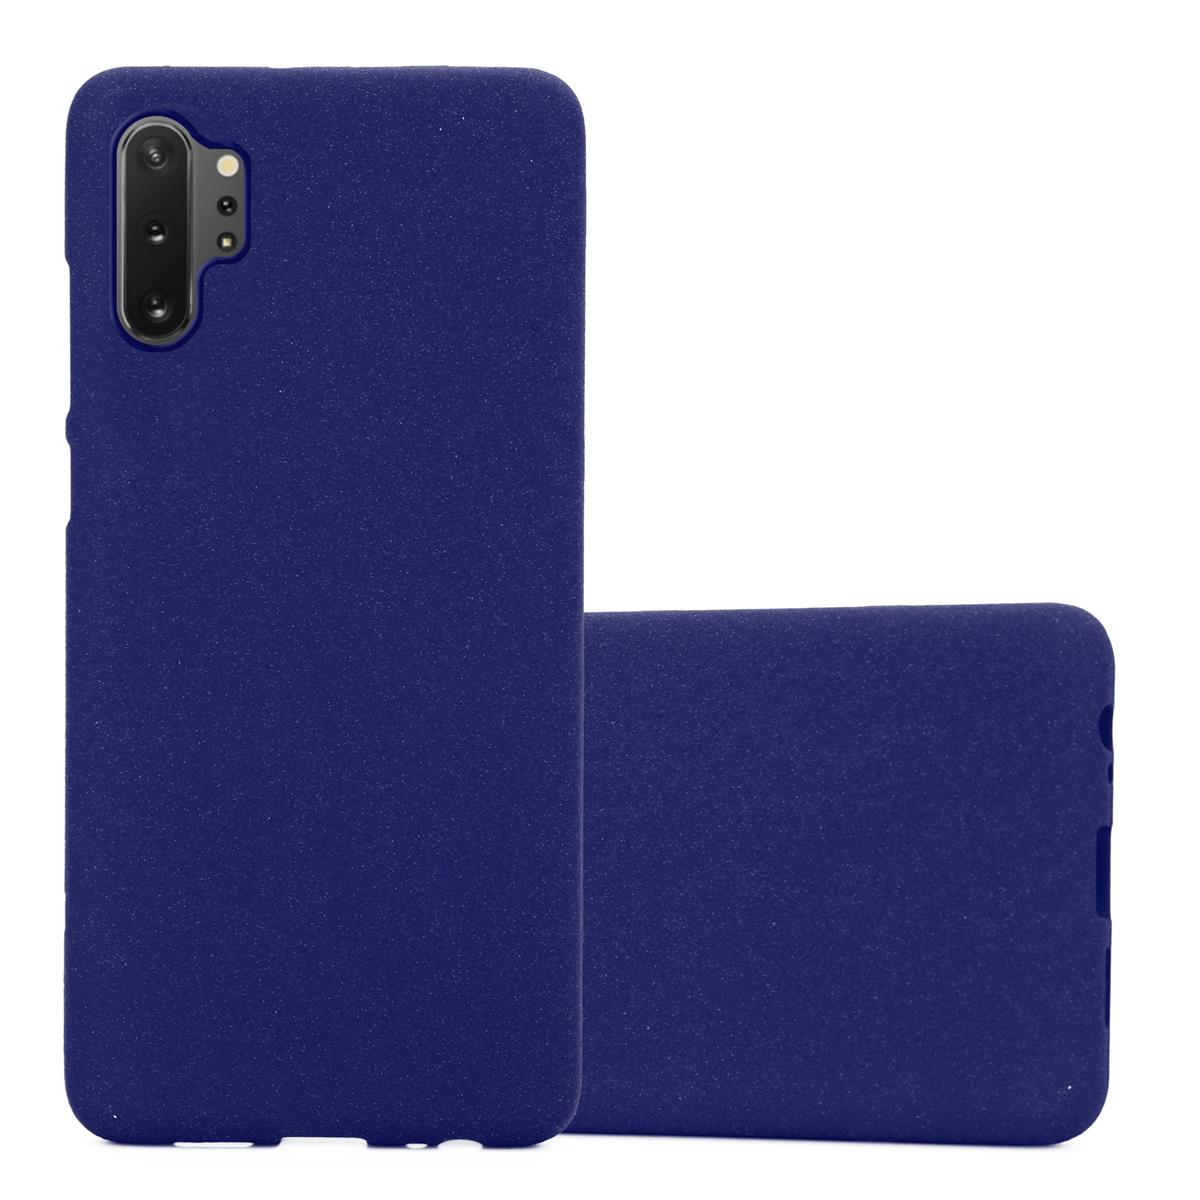 CADORABO TPU PLUS, NOTE FROST BLAU Galaxy Frosted 10 Samsung, DUNKEL Backcover, Schutzhülle